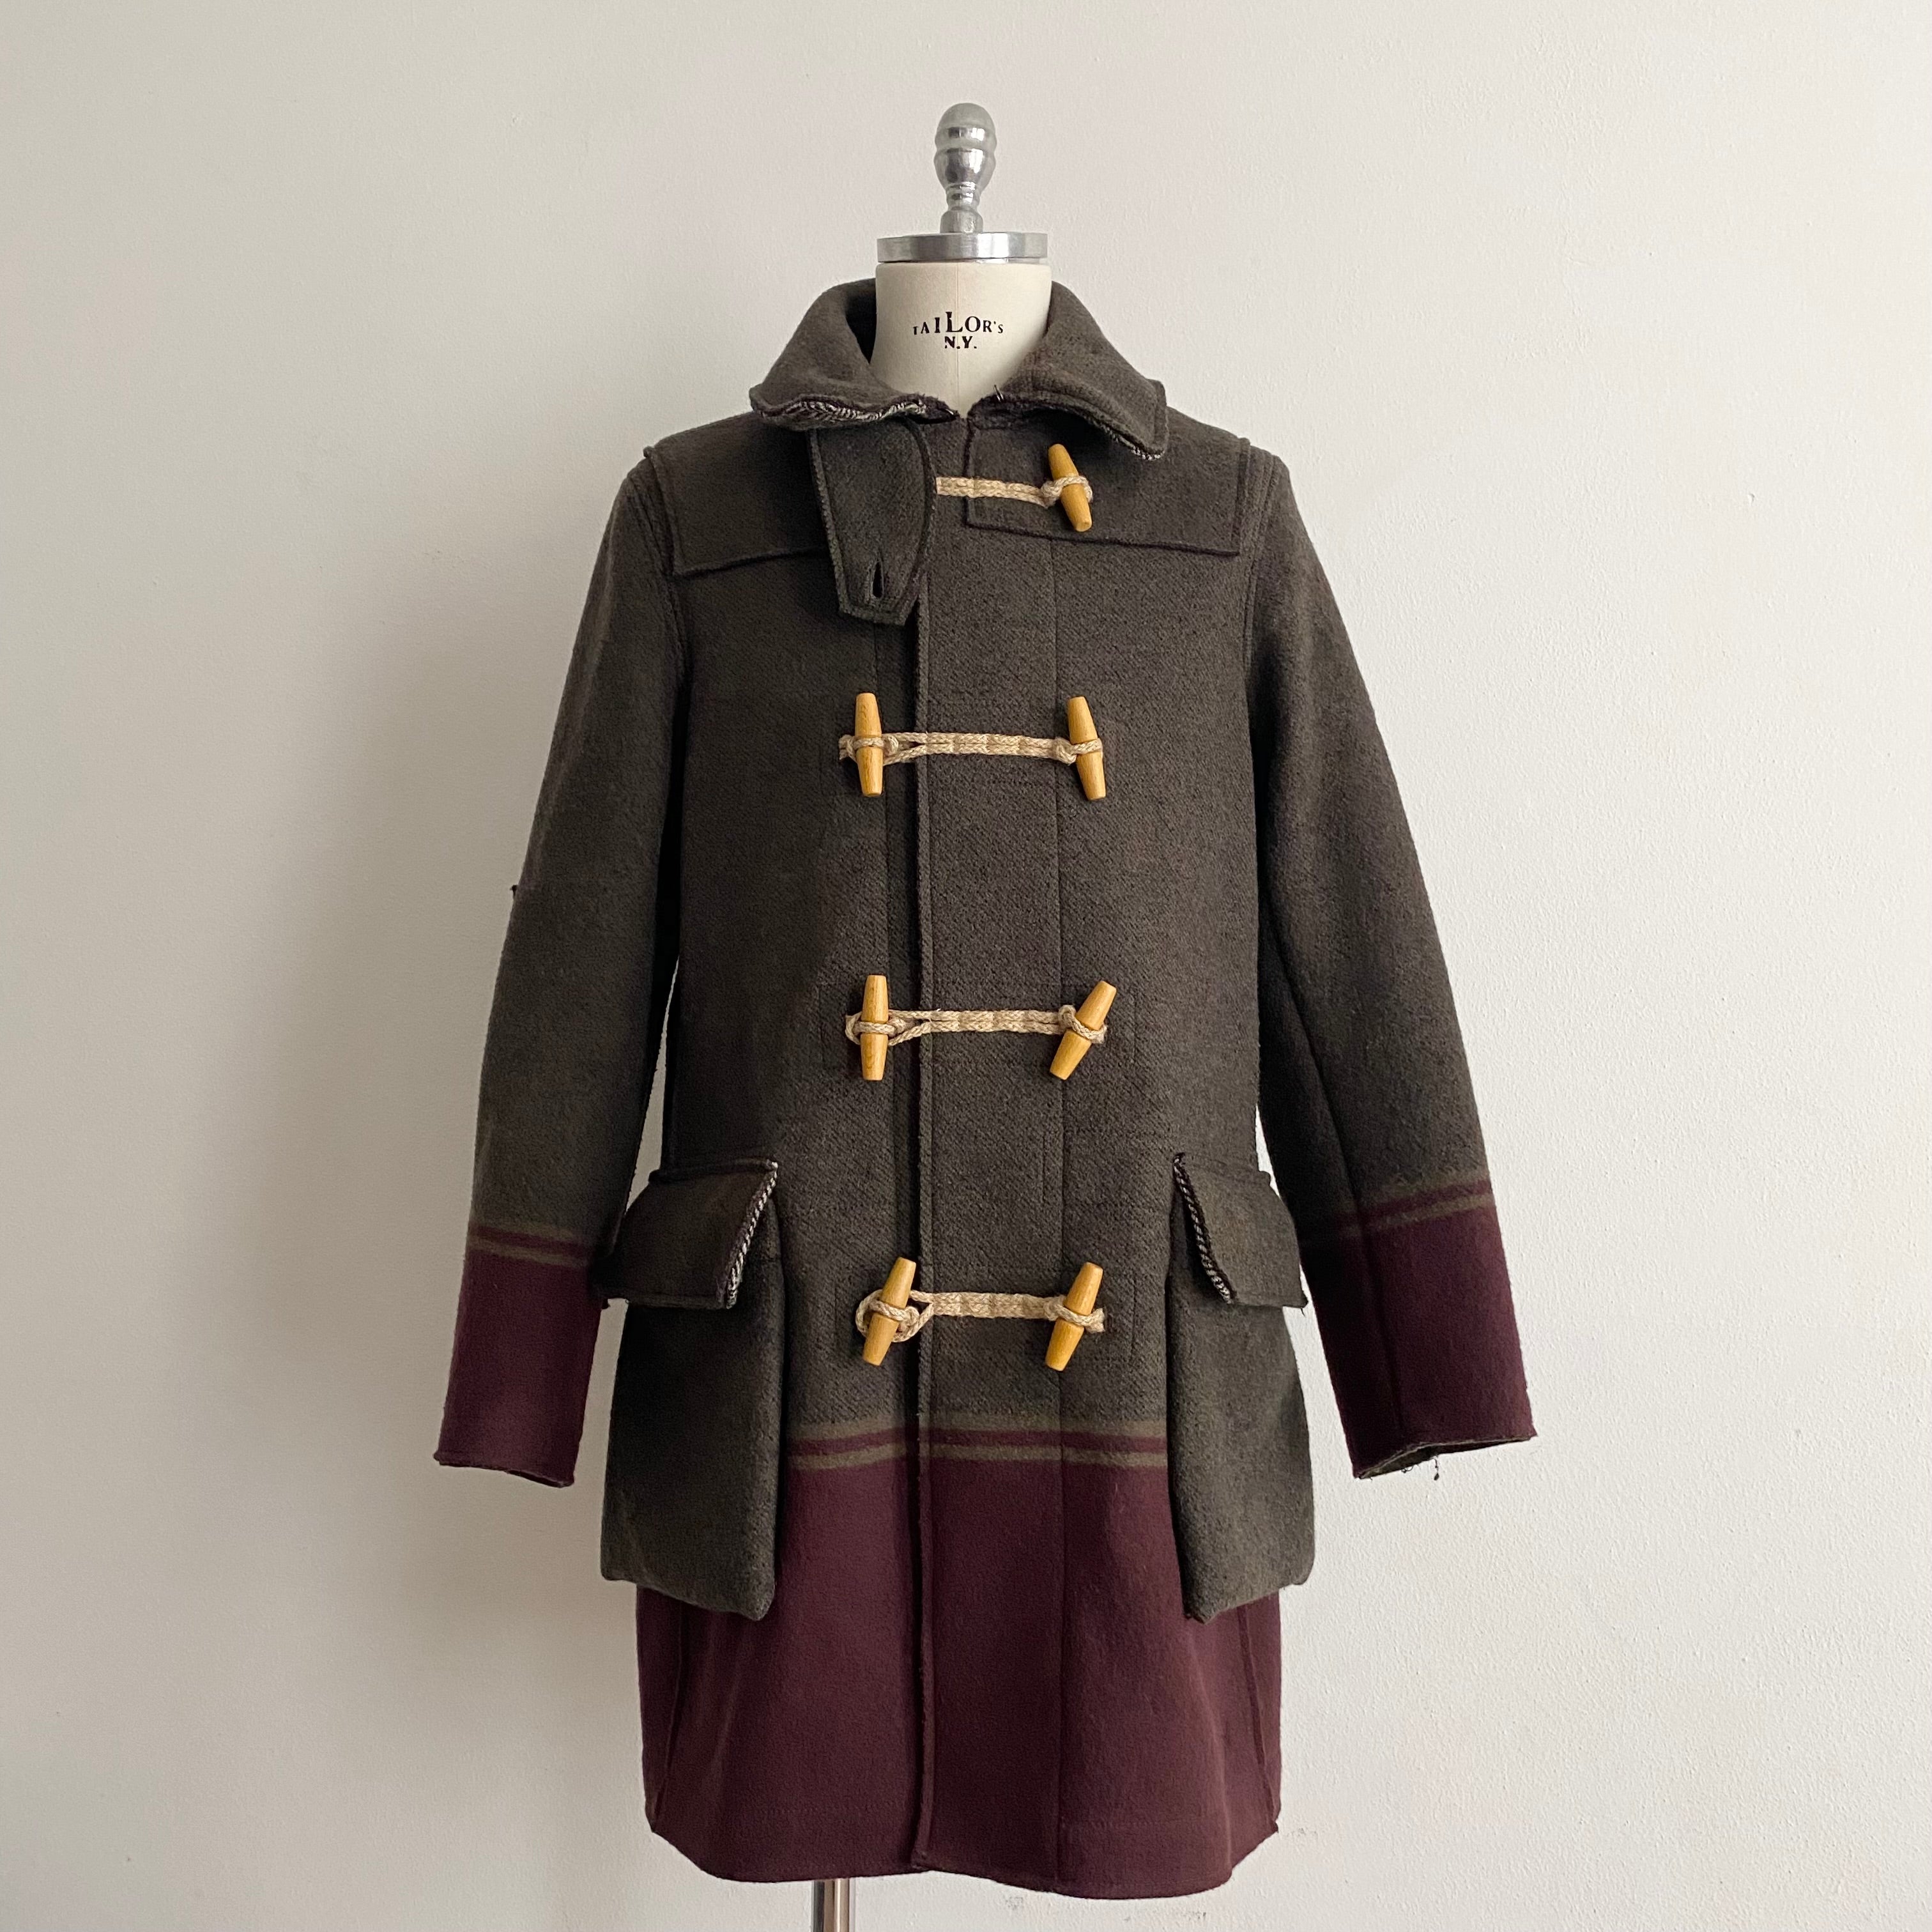 Duffle Coat with Strong Lines - L